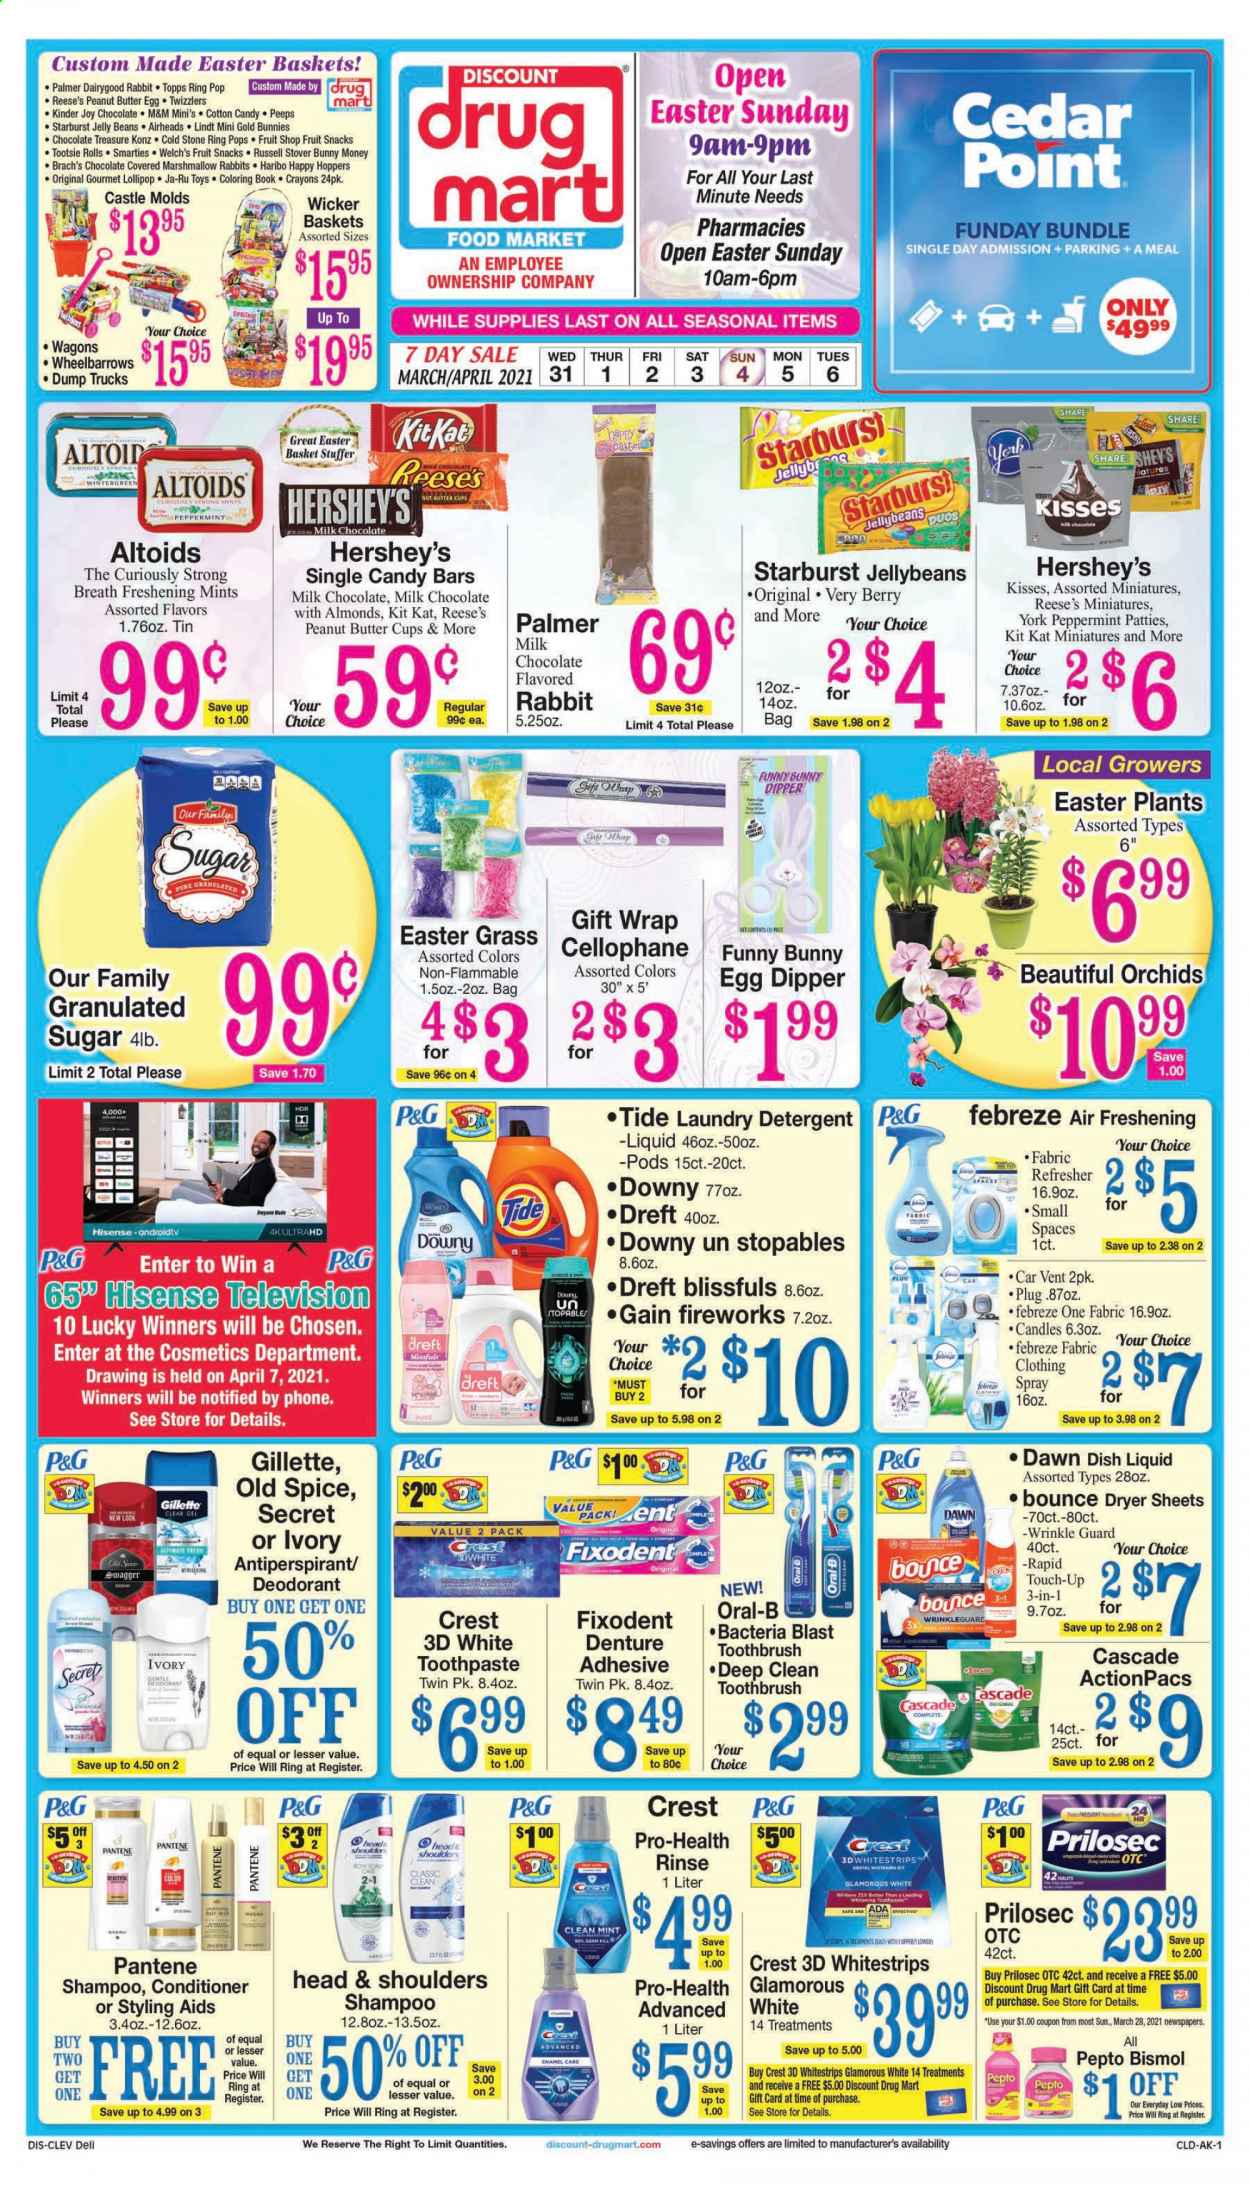 thumbnail - Discount Drug Mart Flyer - 03/31/2021 - 04/06/2021 - Sales products - Welch's, eggs, Reese's, Hershey's, marshmallows, milk chocolate, Haribo, Lindt, Kinder Joy, KitKat, M&M's, AirHeads, cotton candy, lollipop, jelly beans, peanut butter cups, fruit snack, Starburst, Peeps, granulated sugar, sugar, nut butter, almonds, Castle, detergent, Febreze, Gain, Cascade, Tide, laundry detergent, Bounce, dryer sheets, Gain Fireworks, dishwashing liquid, Joy, shampoo, Old Spice, toothbrush, Oral-B, toothpaste, Fixodent, Crest, conditioner, refresher, Head & Shoulders, Pantene, anti-perspirant, deodorant, Gillette, basket, gift wrap, candle, book, rabbit, Android TV, Hisense. Page 1.